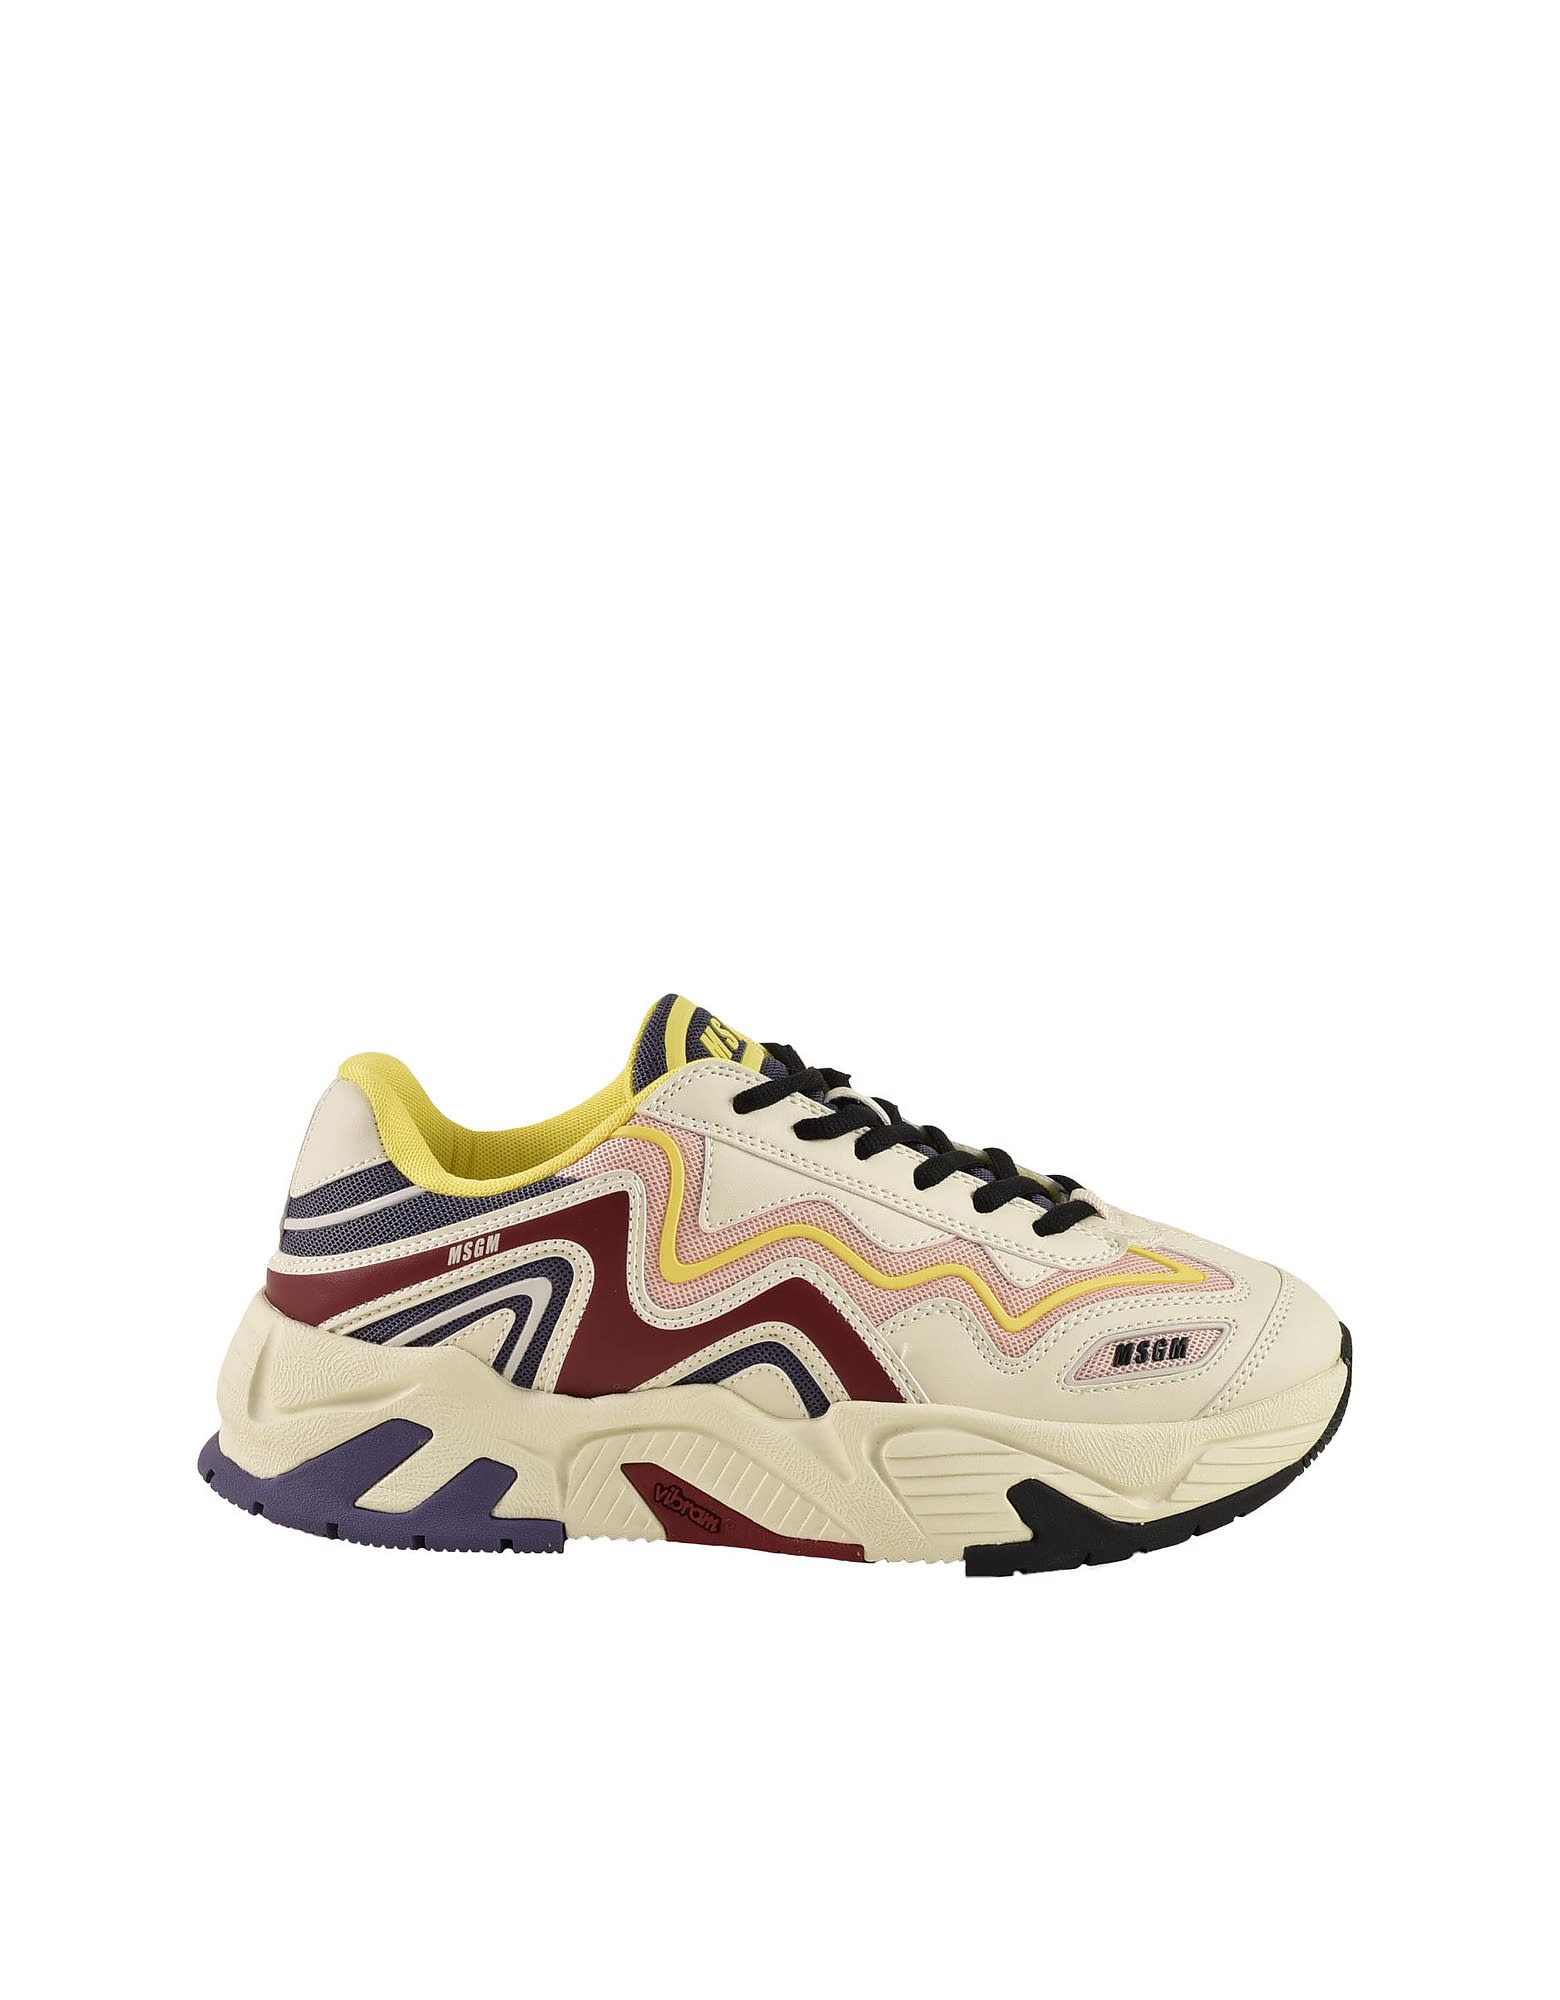 MSGM Mens White / Pink Sneakers